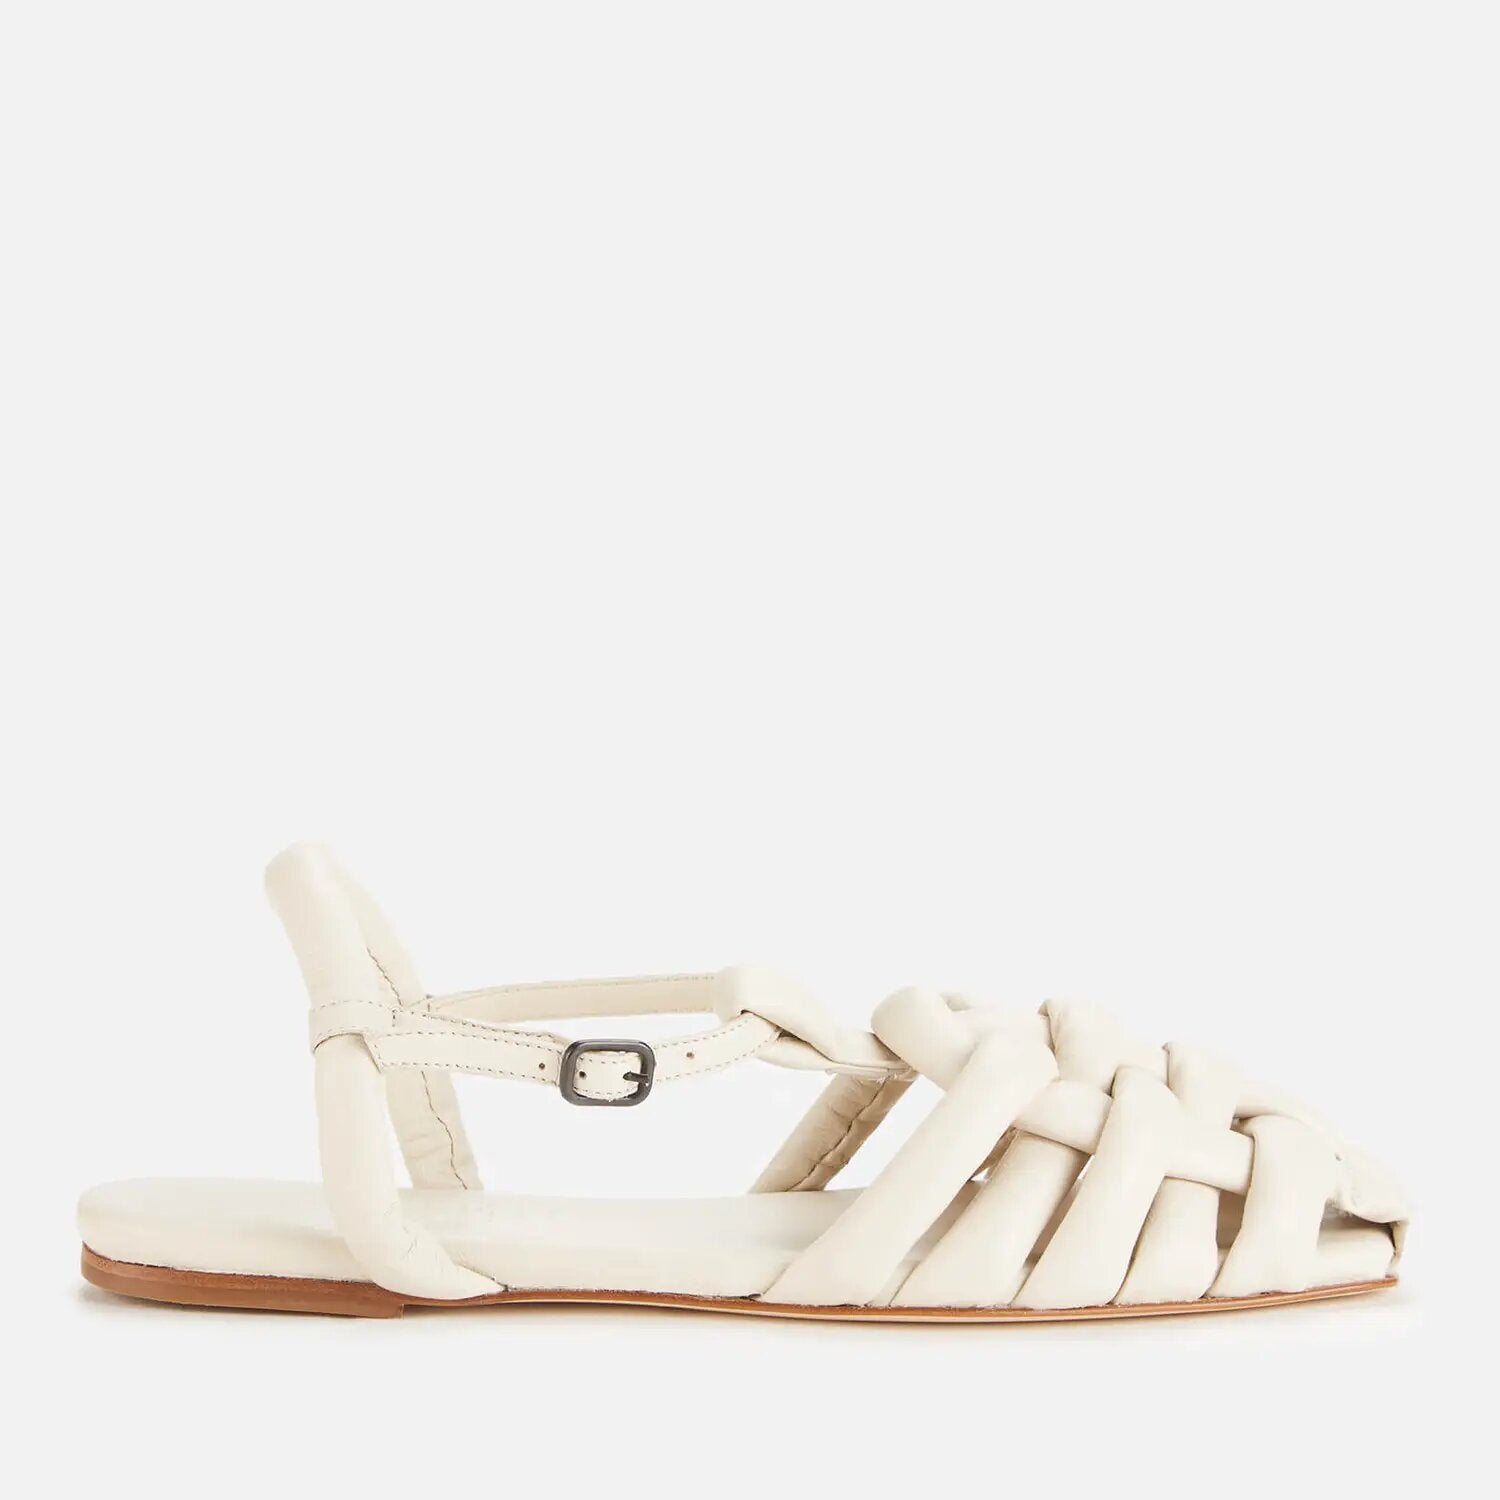 Fisherman Sandals Will Be Everywhere This Spring